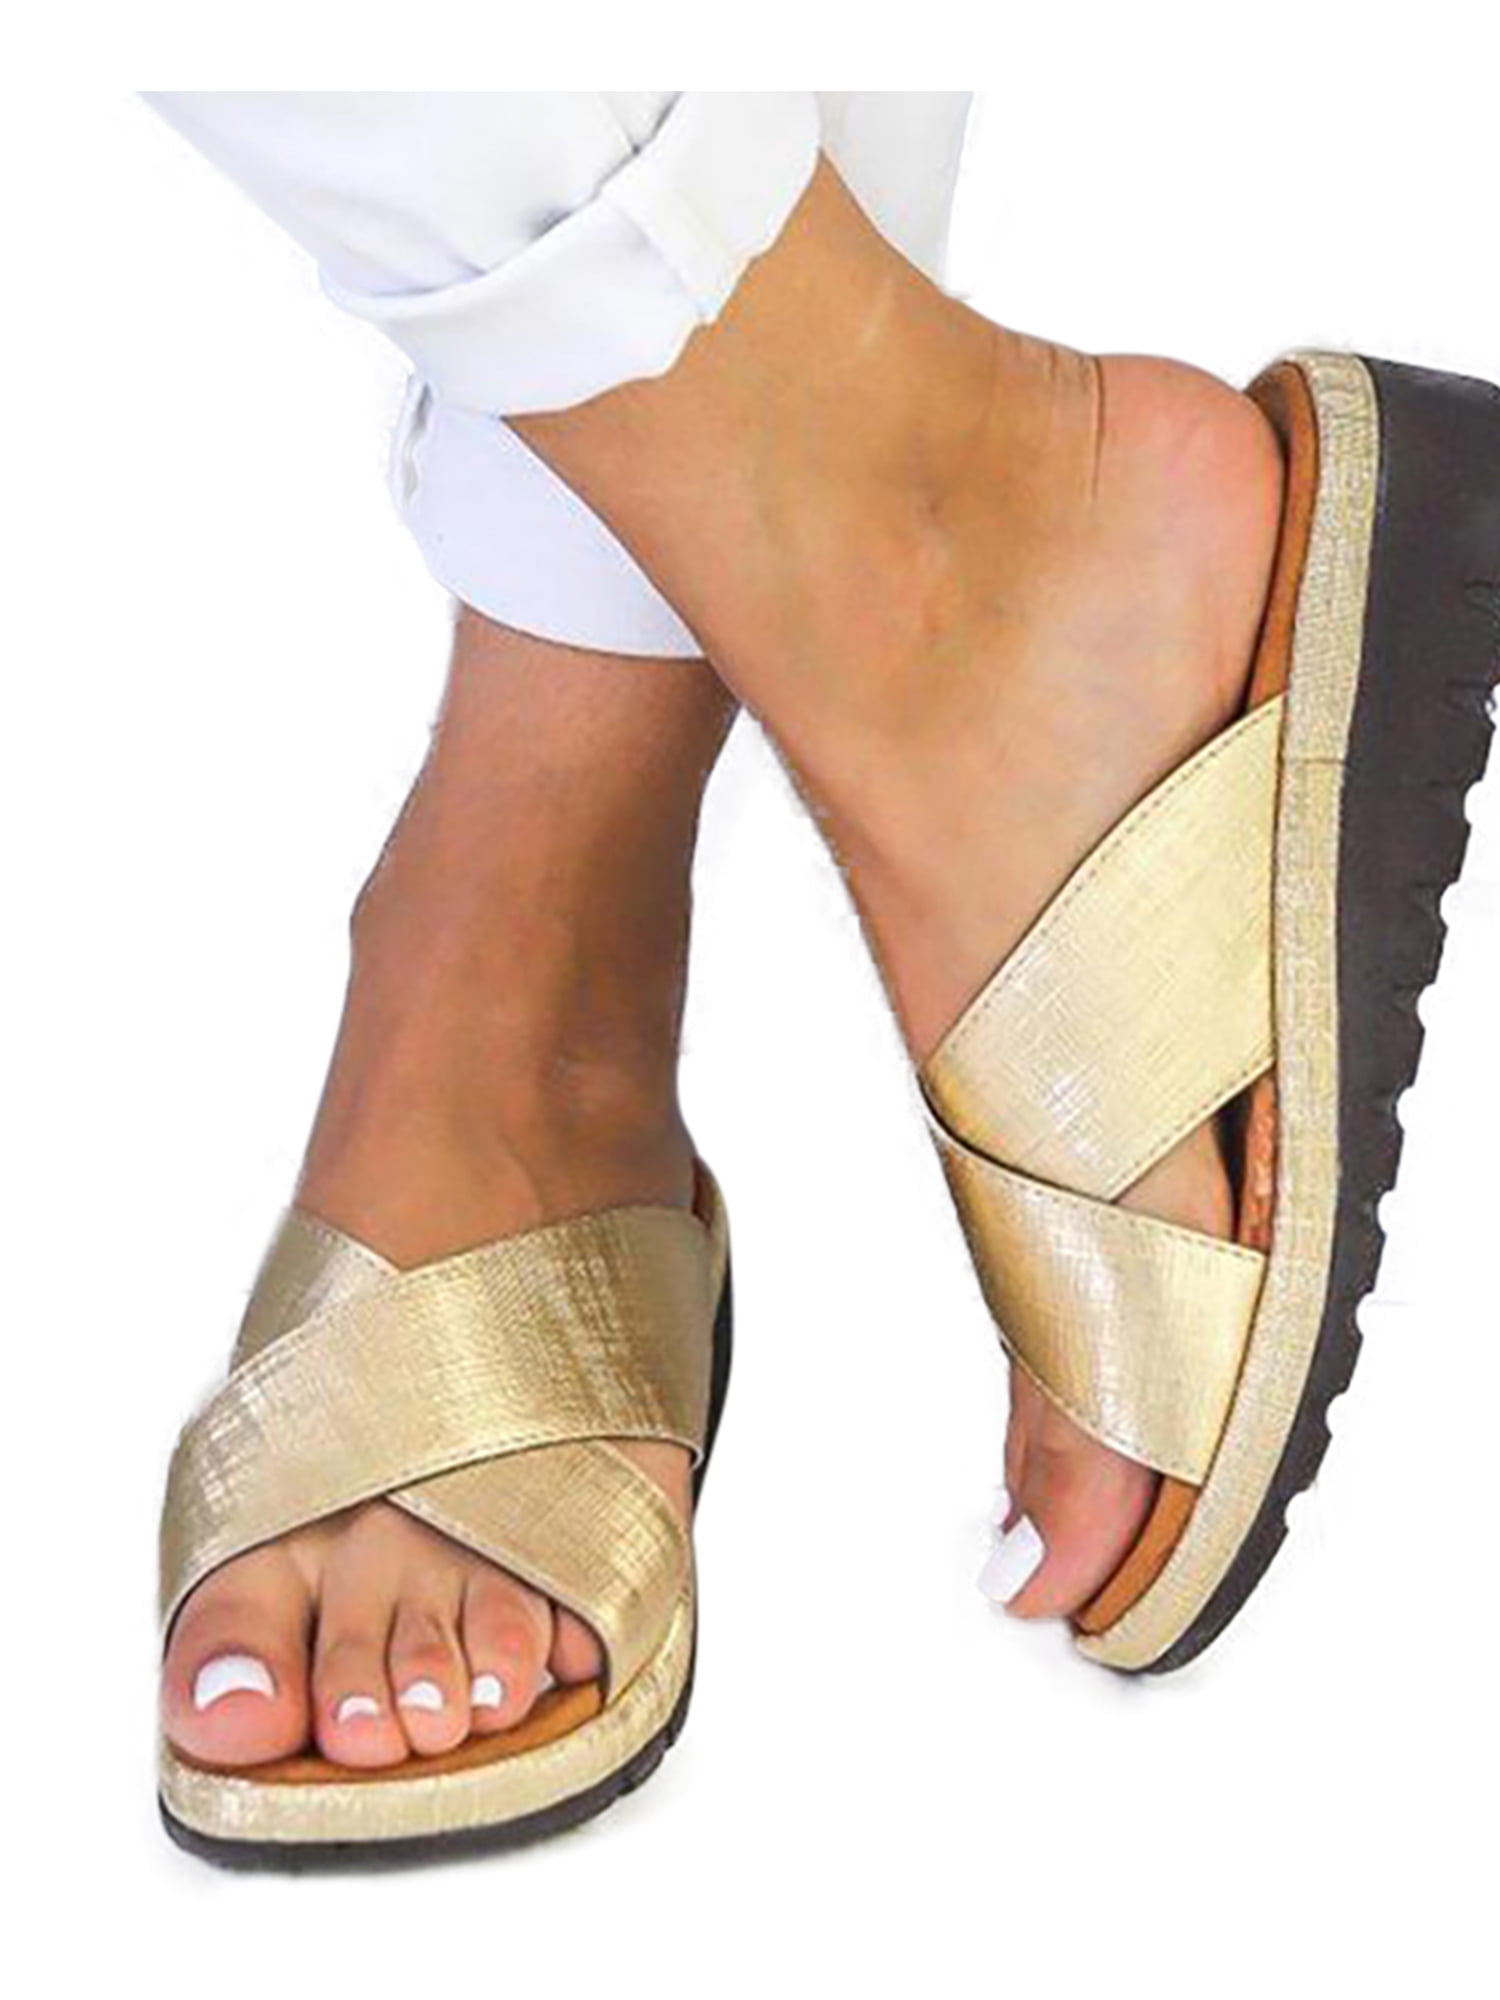 Women Clear Platform Peep Toe Sandals Slingback Casual Slippers Wedge Shoes Size 